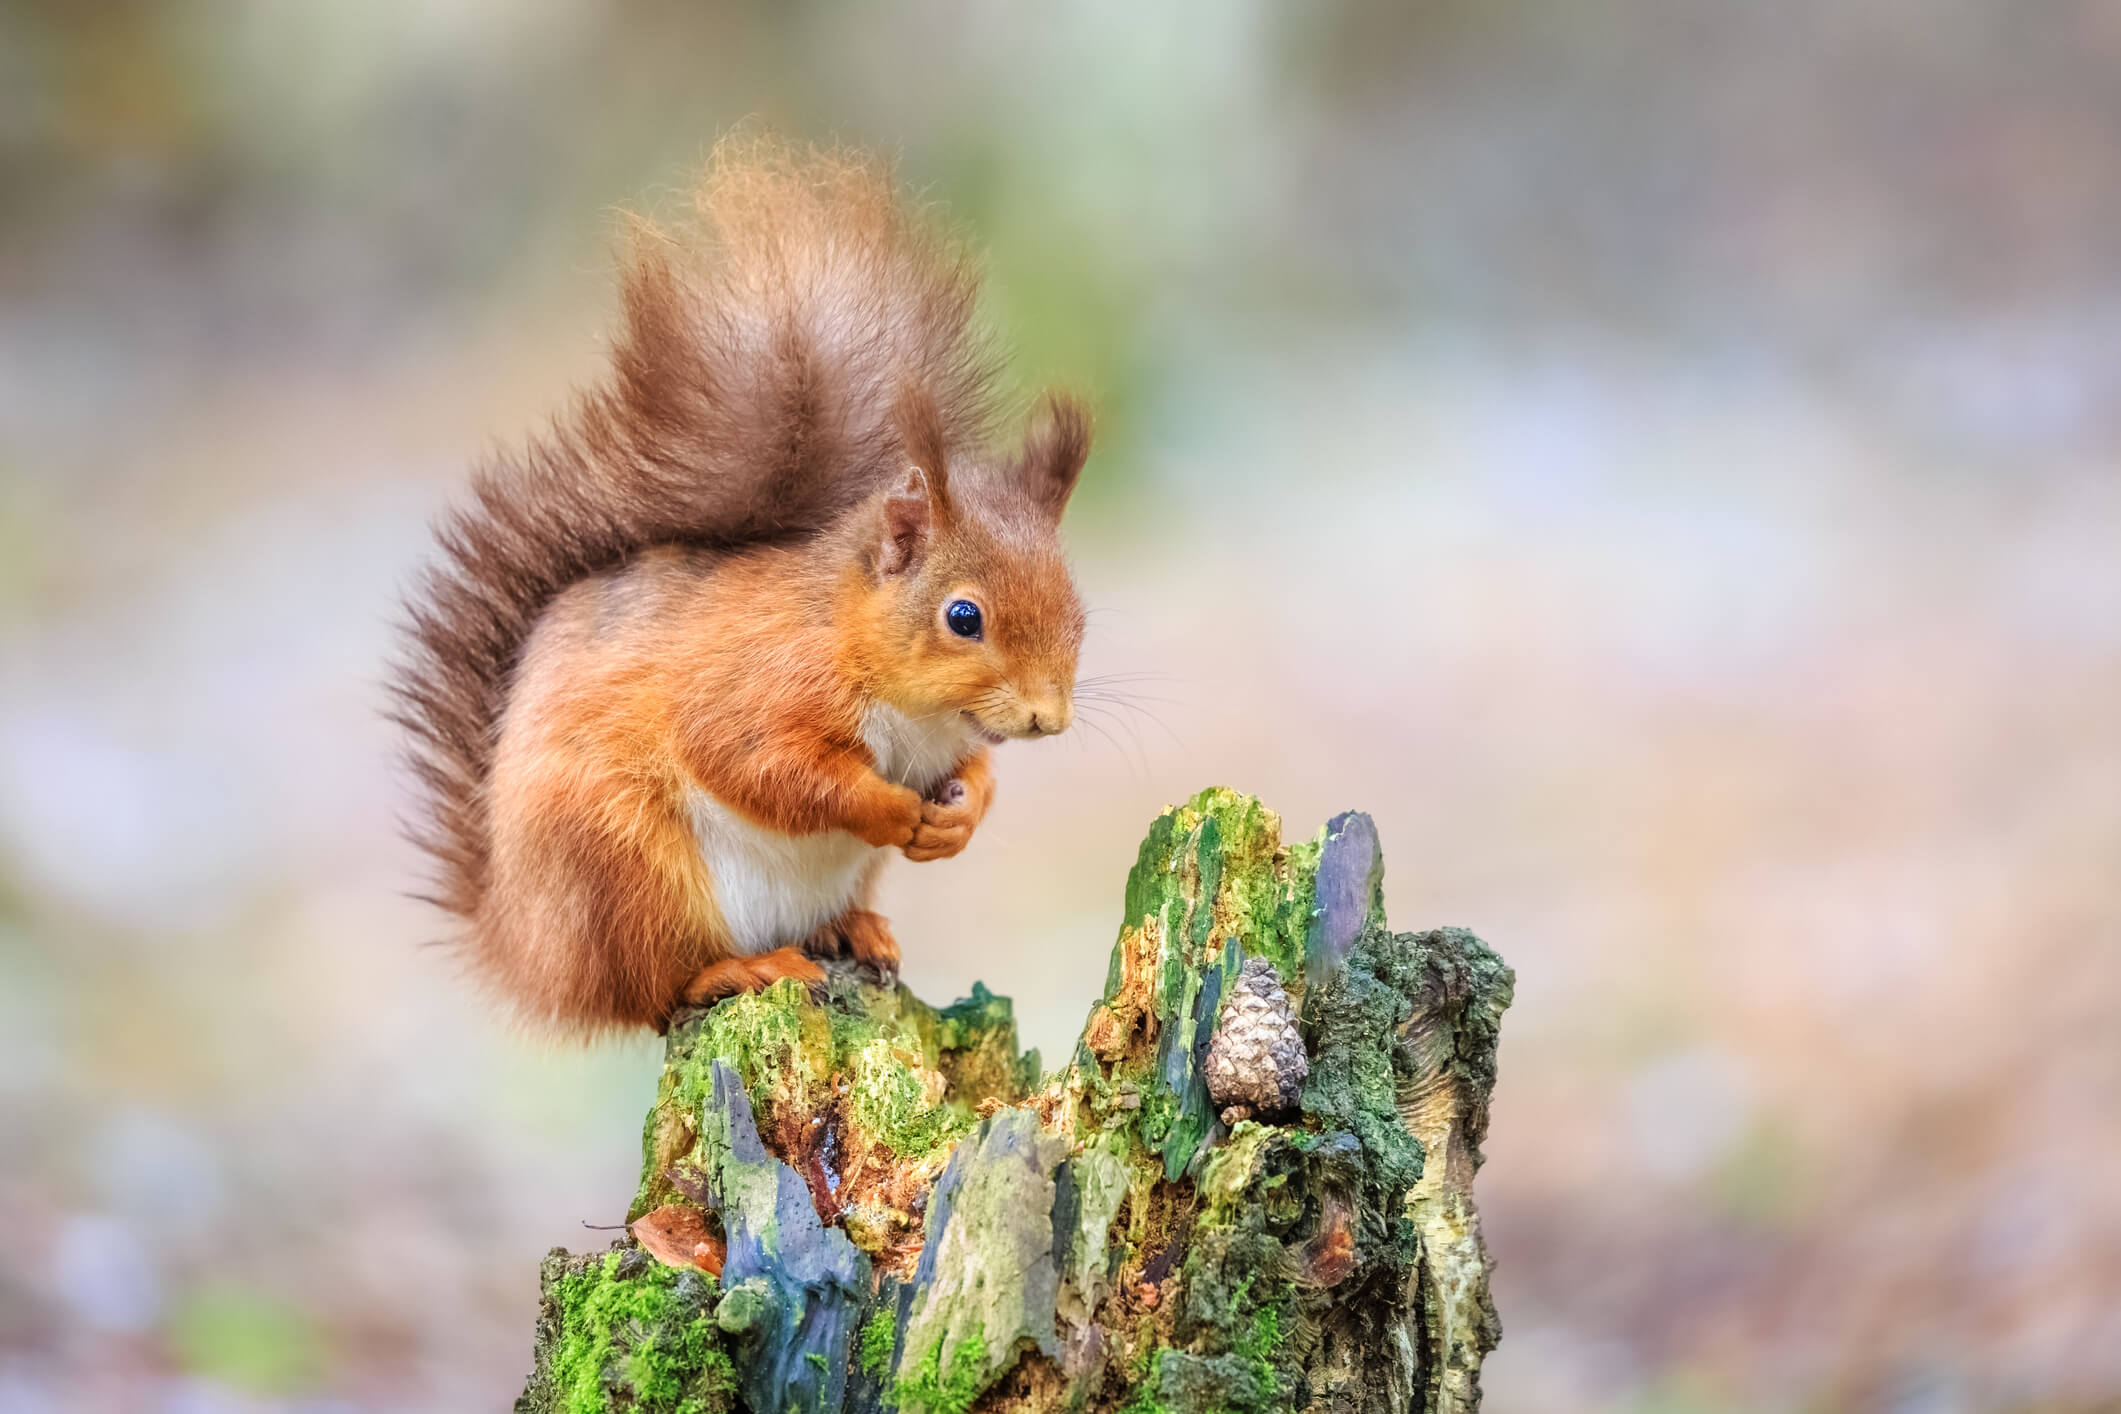 Cute red squirrel sitting in forest, England